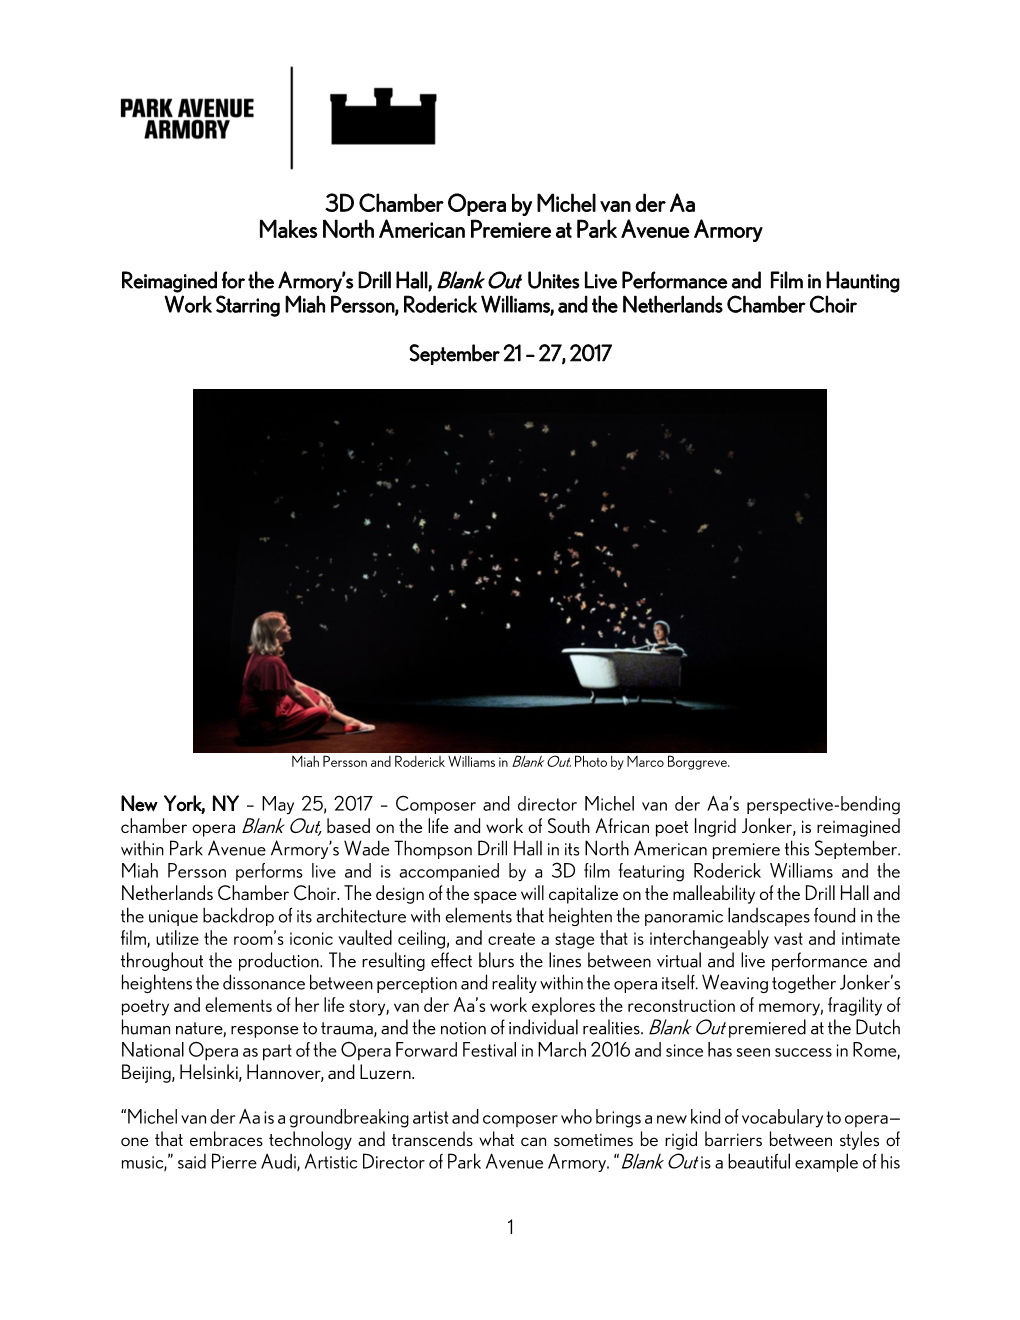 3D Chamber Opera by Michel Van Der Aa Makes North American Premiere at Park Avenue Armory